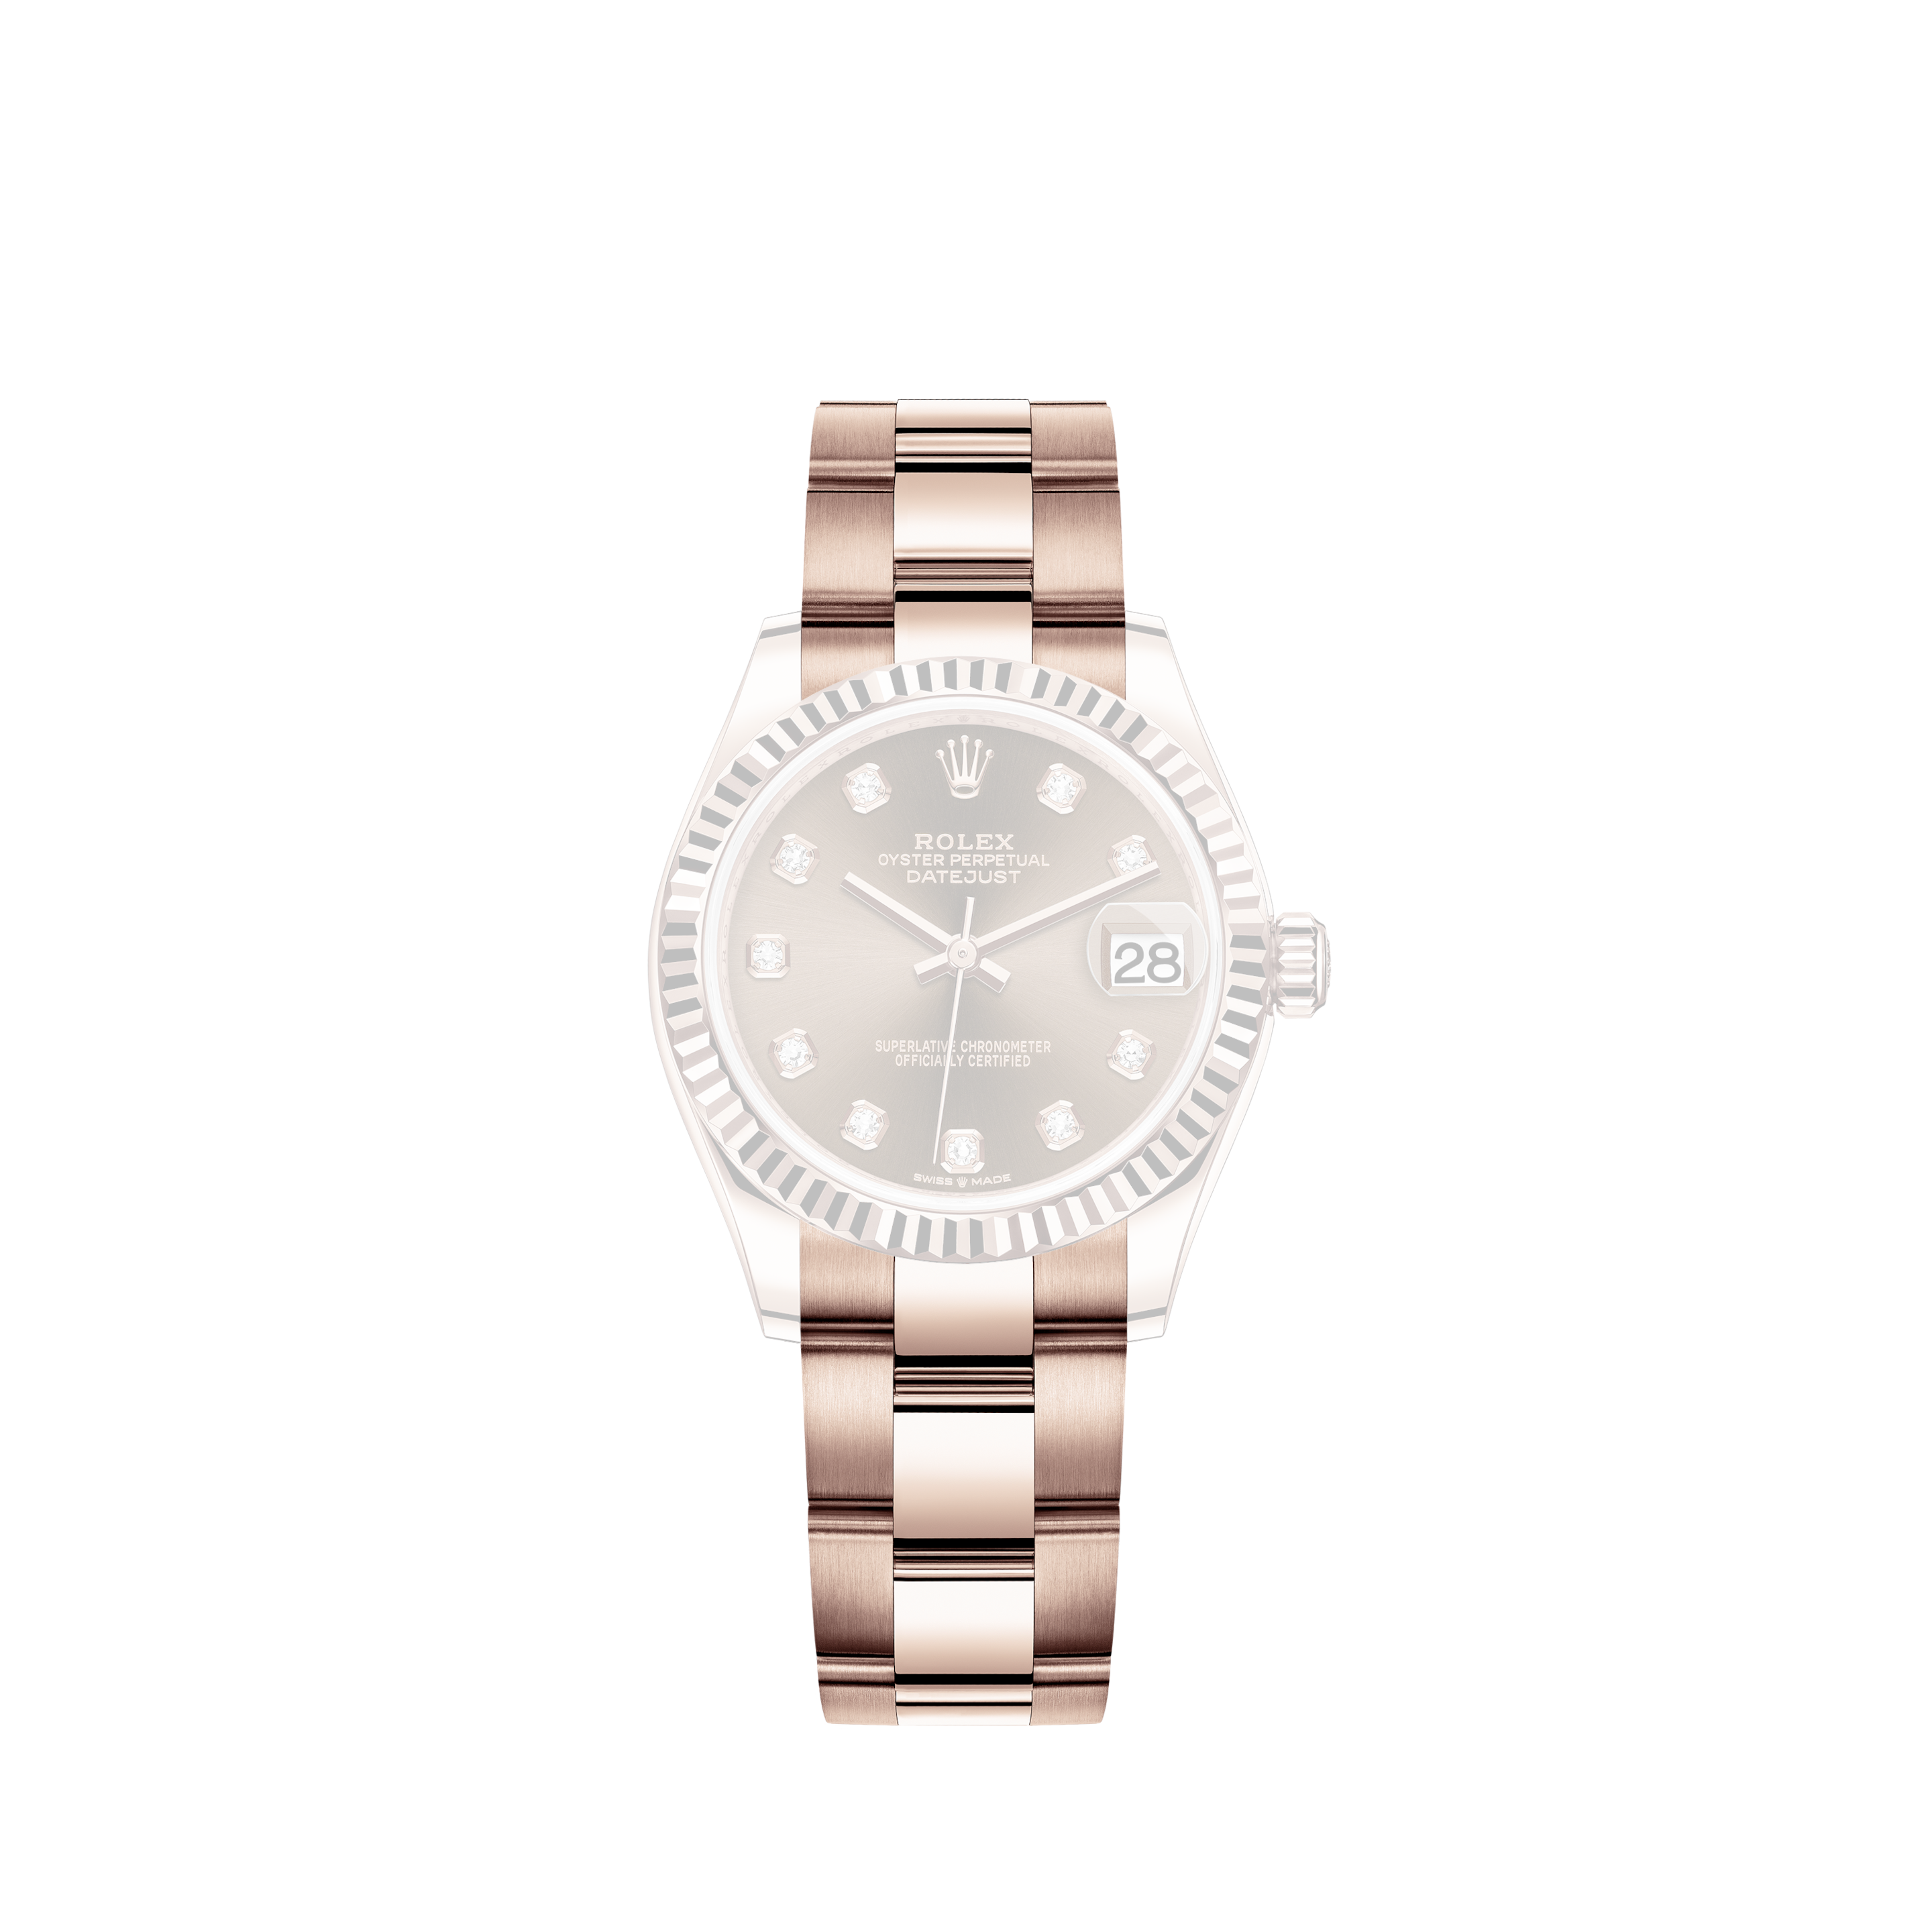 Rolex Tridor Datejust, Reference 68279b, A Three Colour Gold And Diamond-set Wristwatch With Date And Bracelet, Circa 1989 | 勞力士 Tridor Datejust 型號68###Rolex Submariner Date